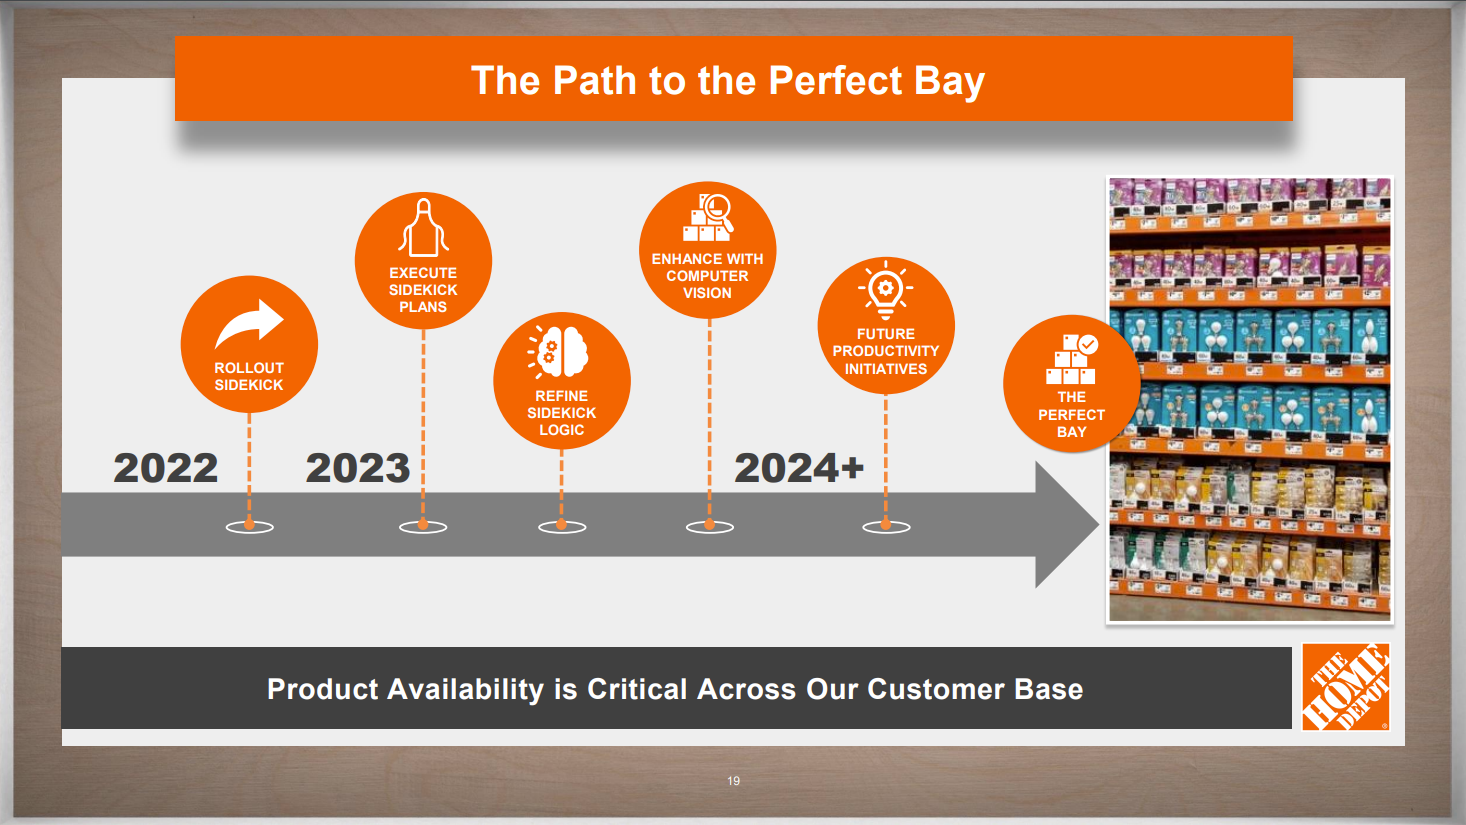 Home Depot's B2B Strategy: Digital Experience, Trade Credit